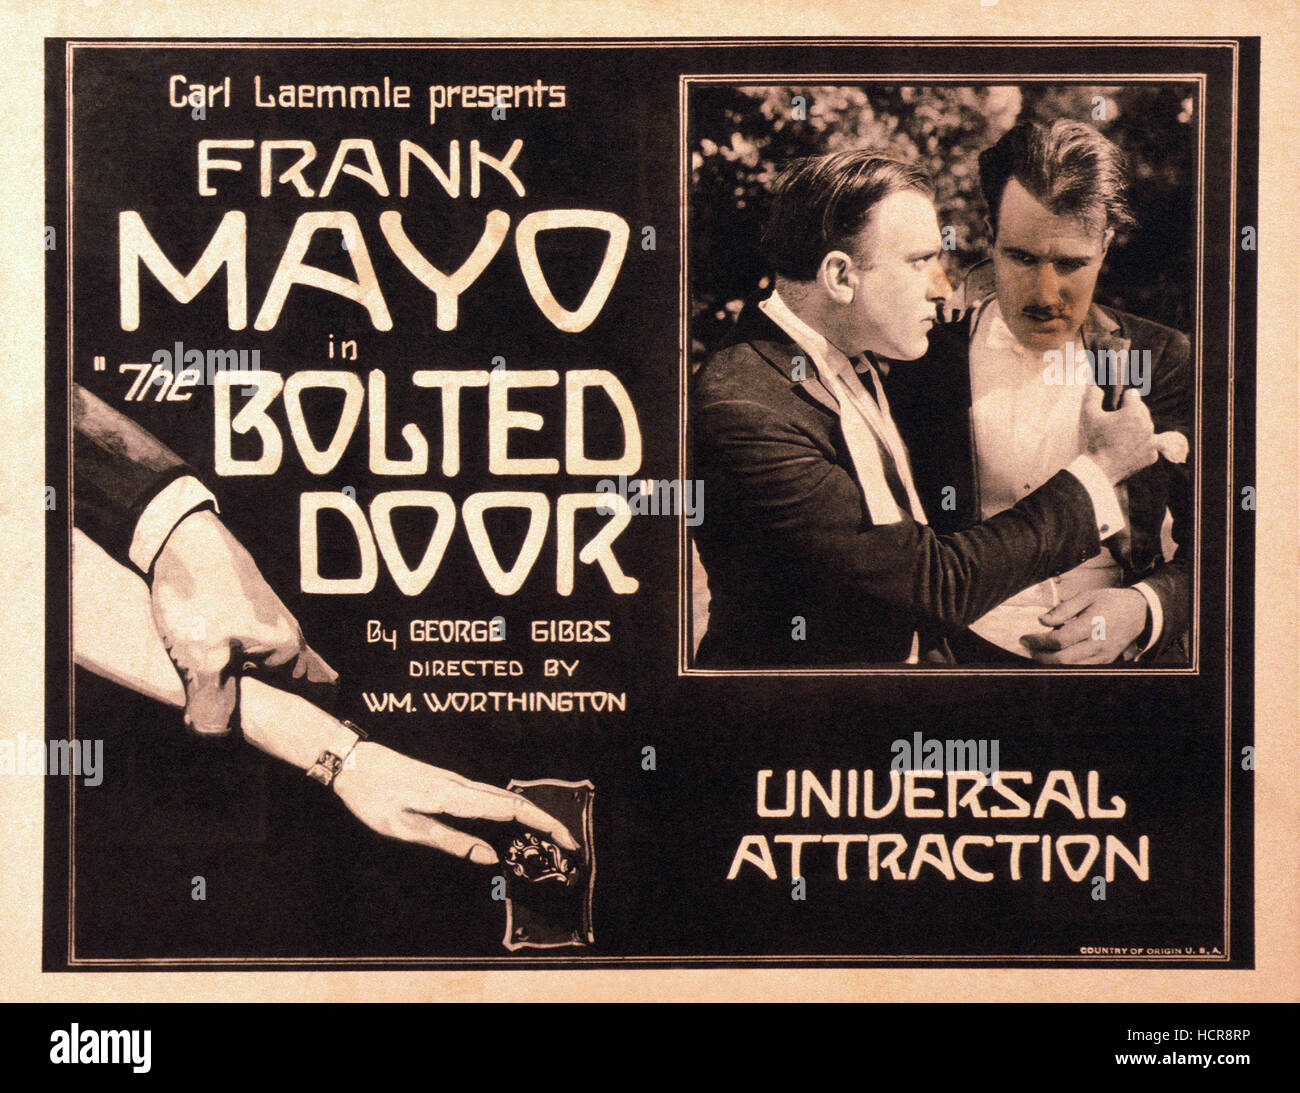 THE BOLTED DOOR, Frank Mayo (left), 1923 Stock Photo